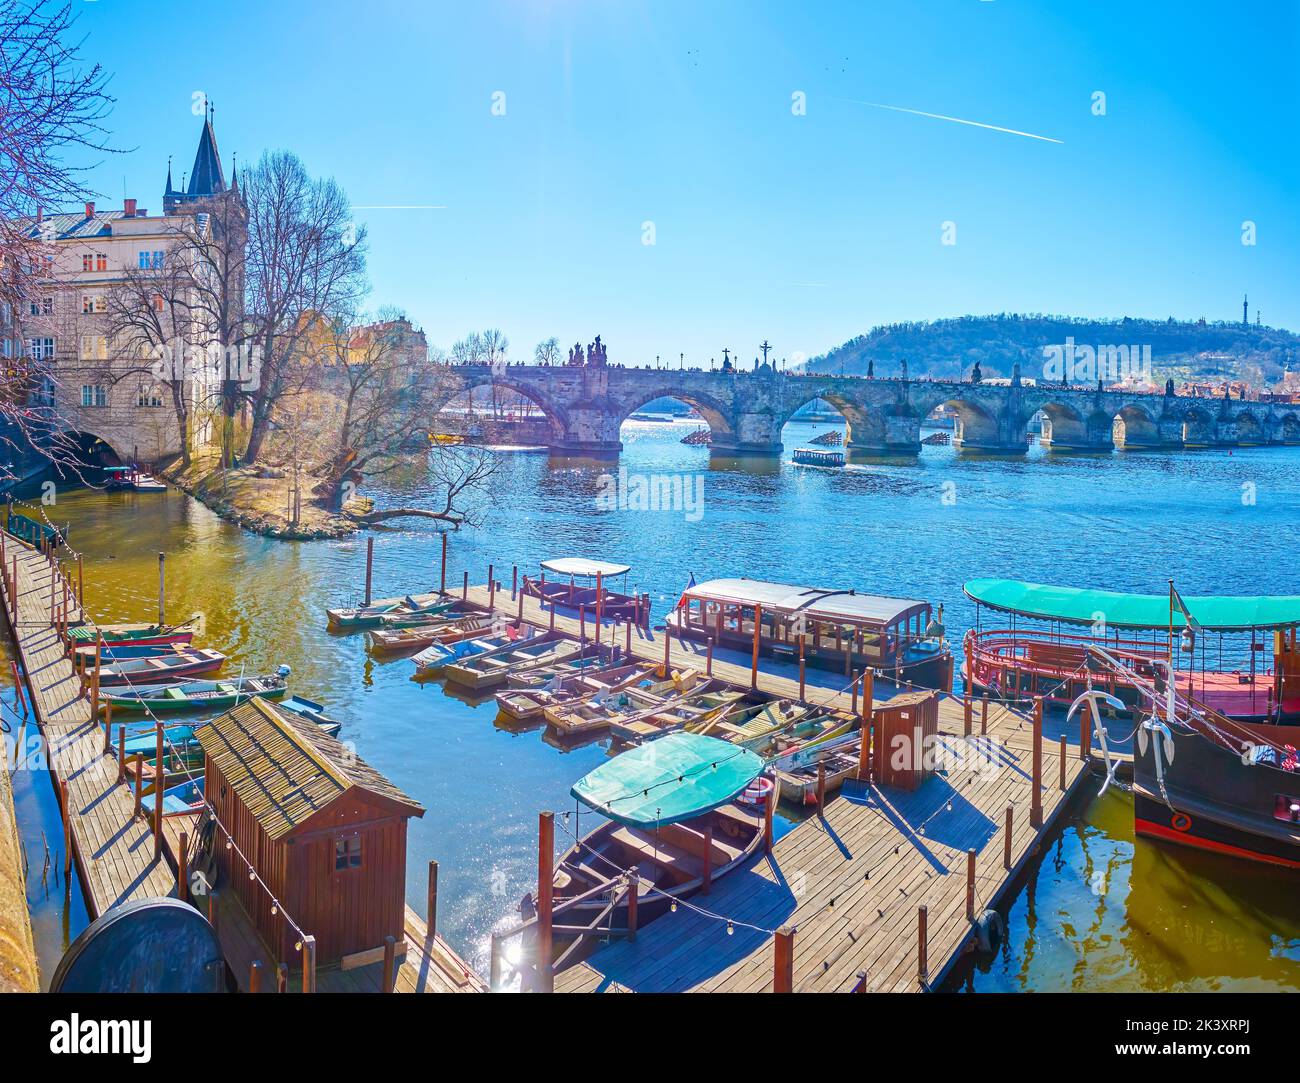 The small pier with old wooden boats and tourist ferries at Charles Bridge in the heart of Prague, Czech Republic Stock Photo